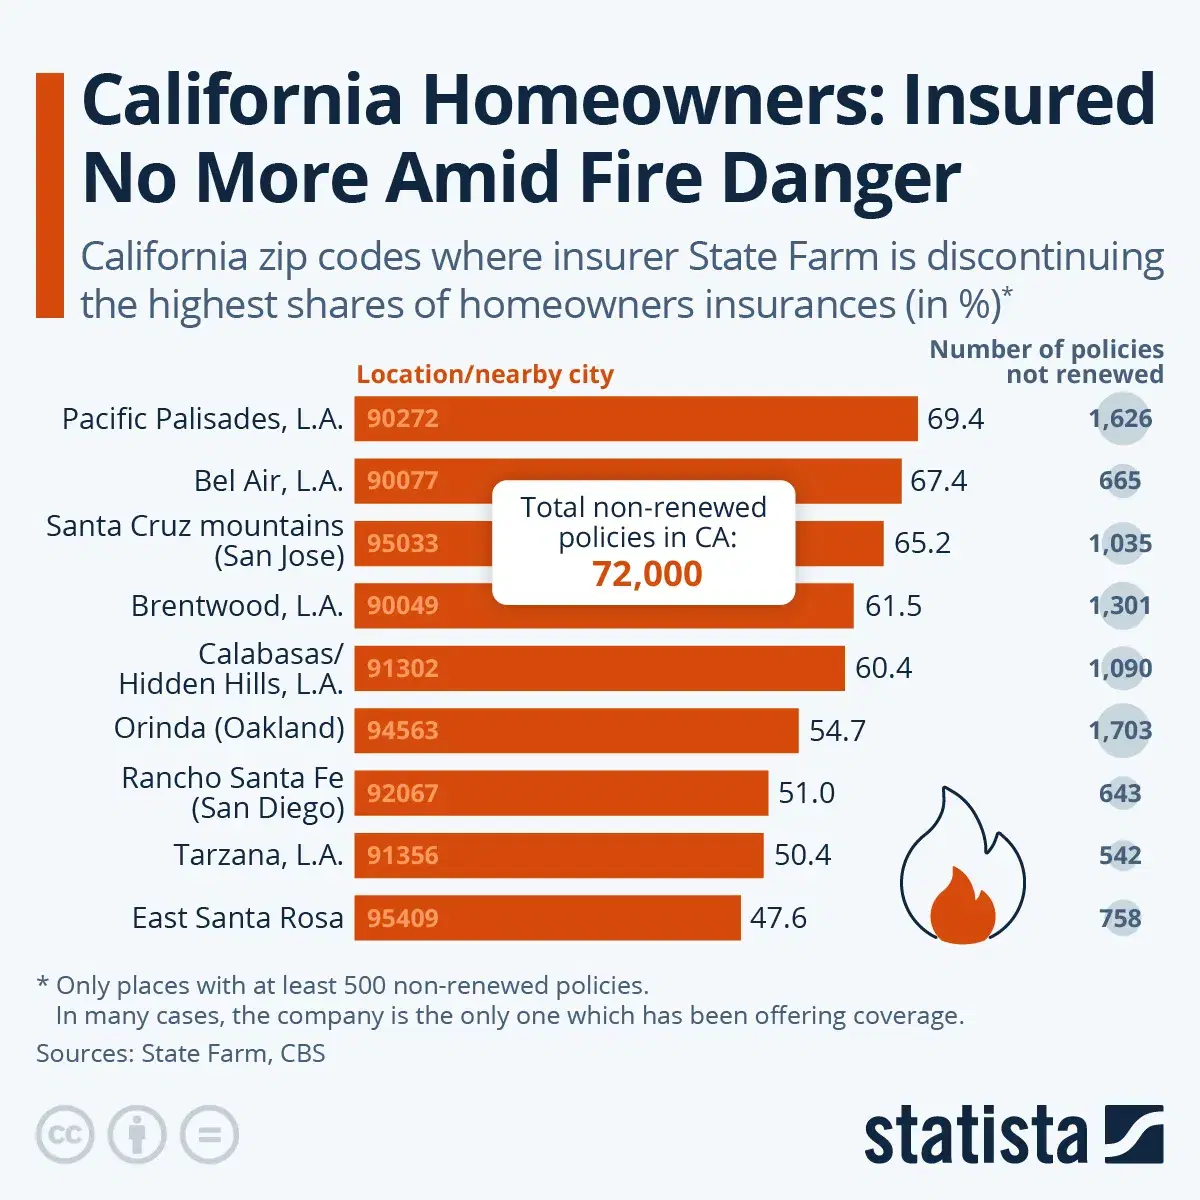 California Homeowners: Insured No More Amid Fire Danger